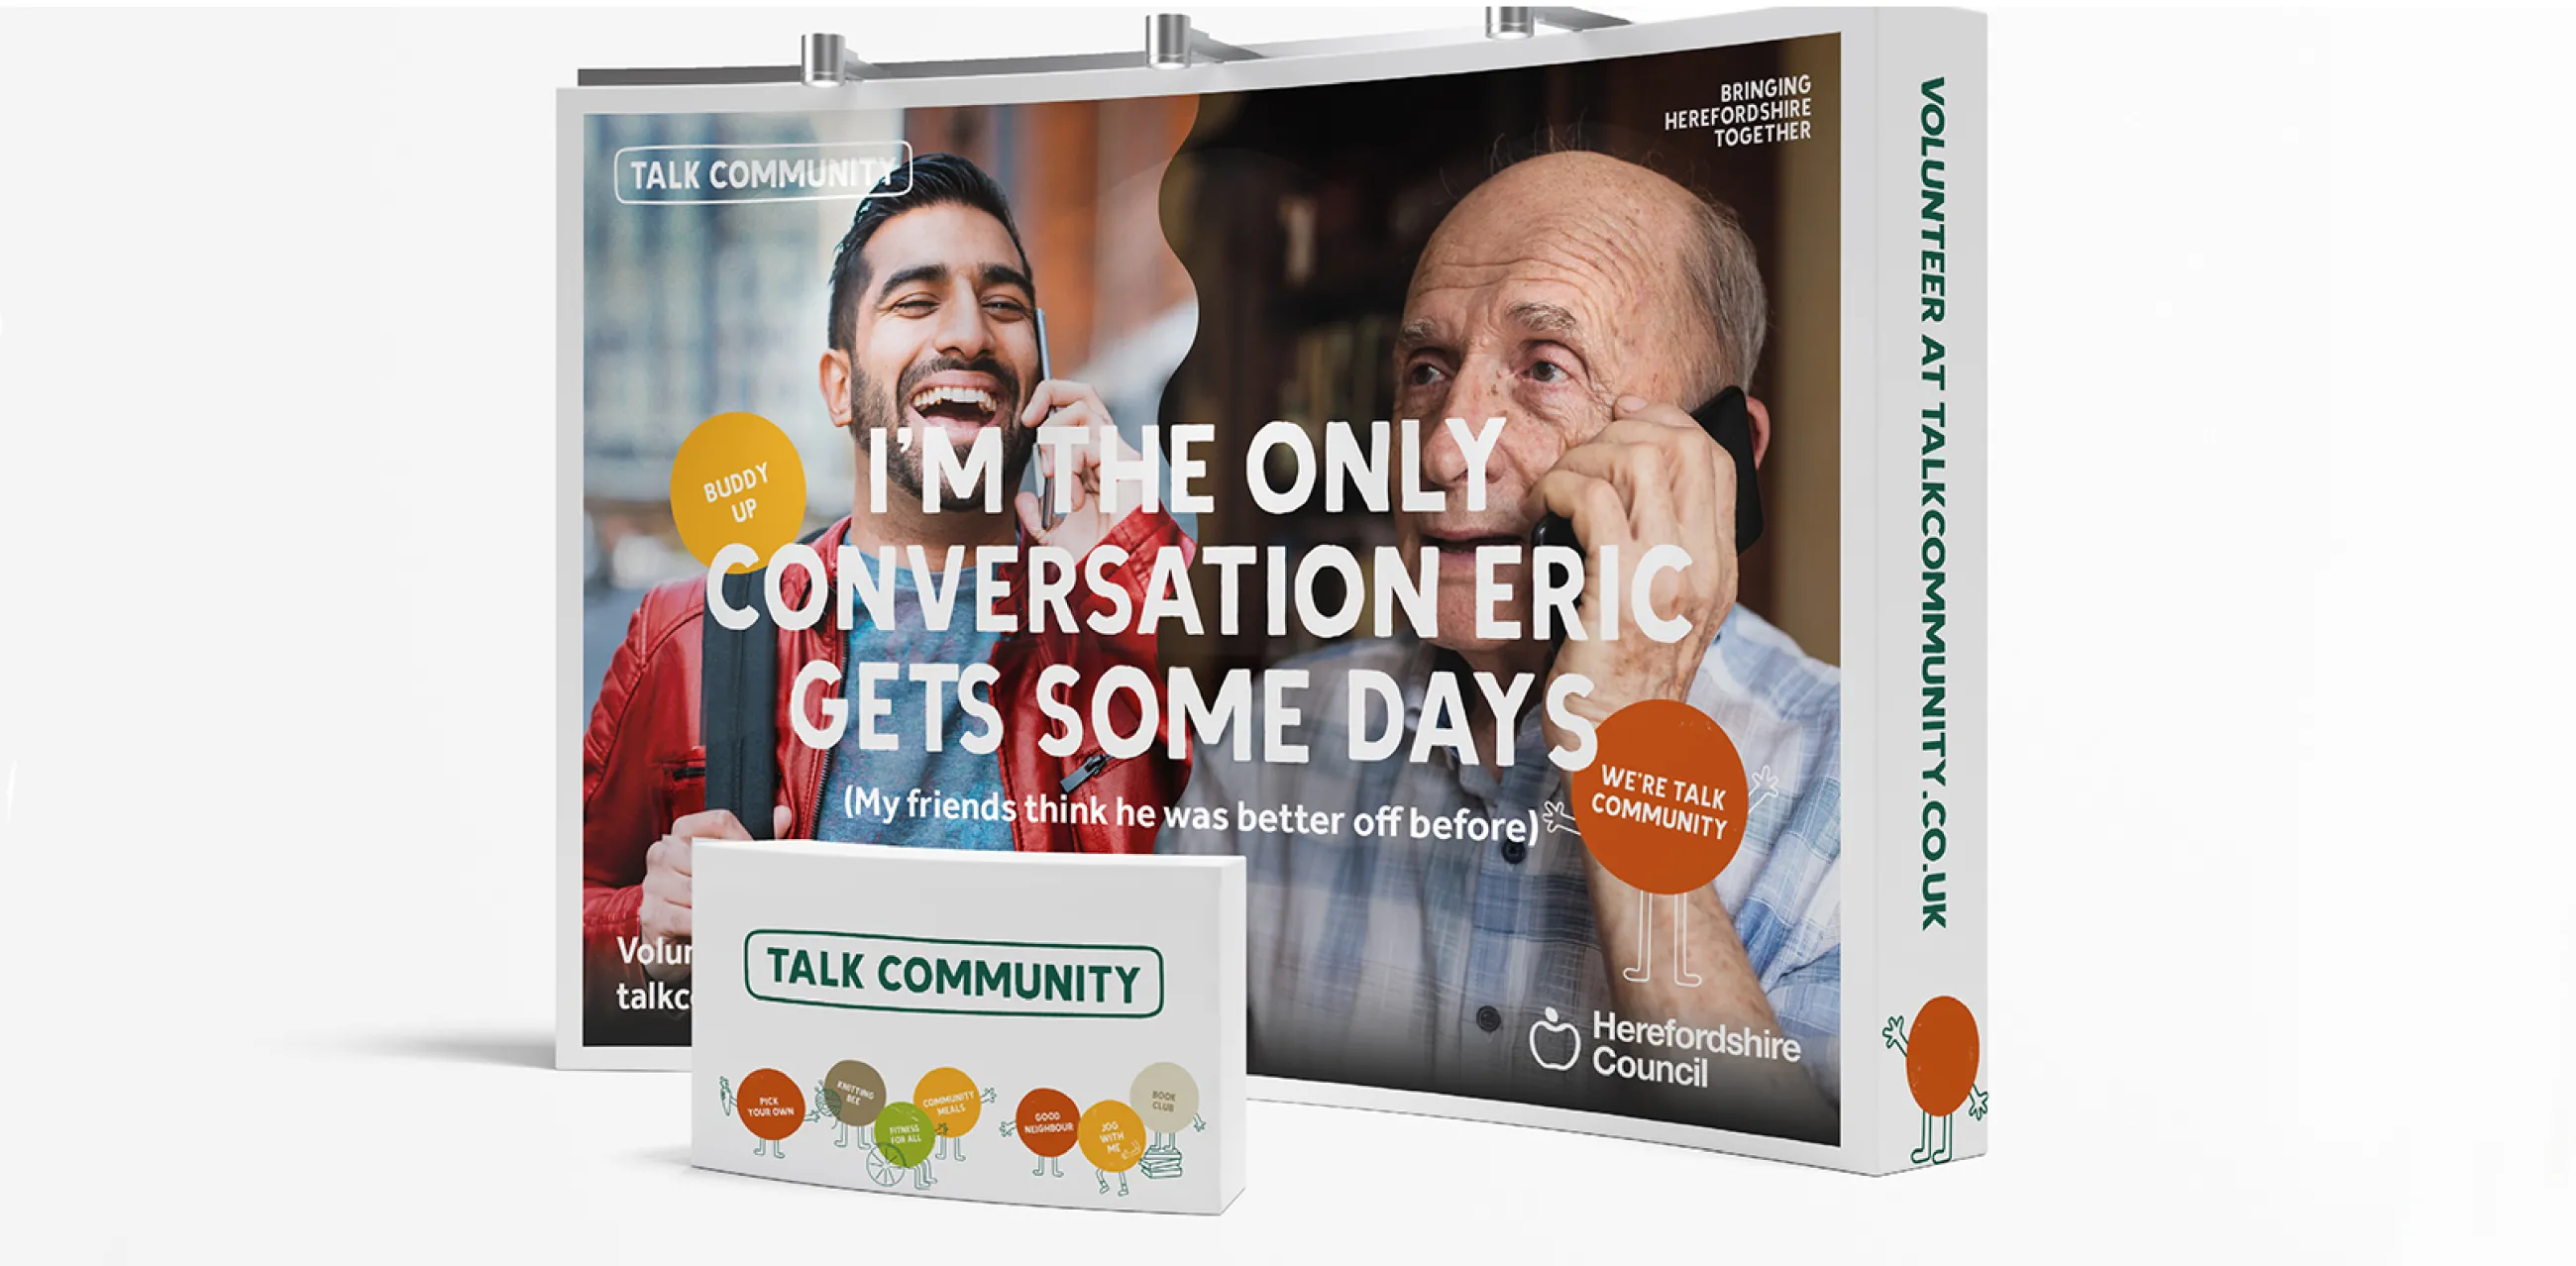 Talk Community exhibition stand - image shows a young man on the phone to an elderly man. "I'm the only conversation Eric gets these days. (My friends think he was better off before.)"